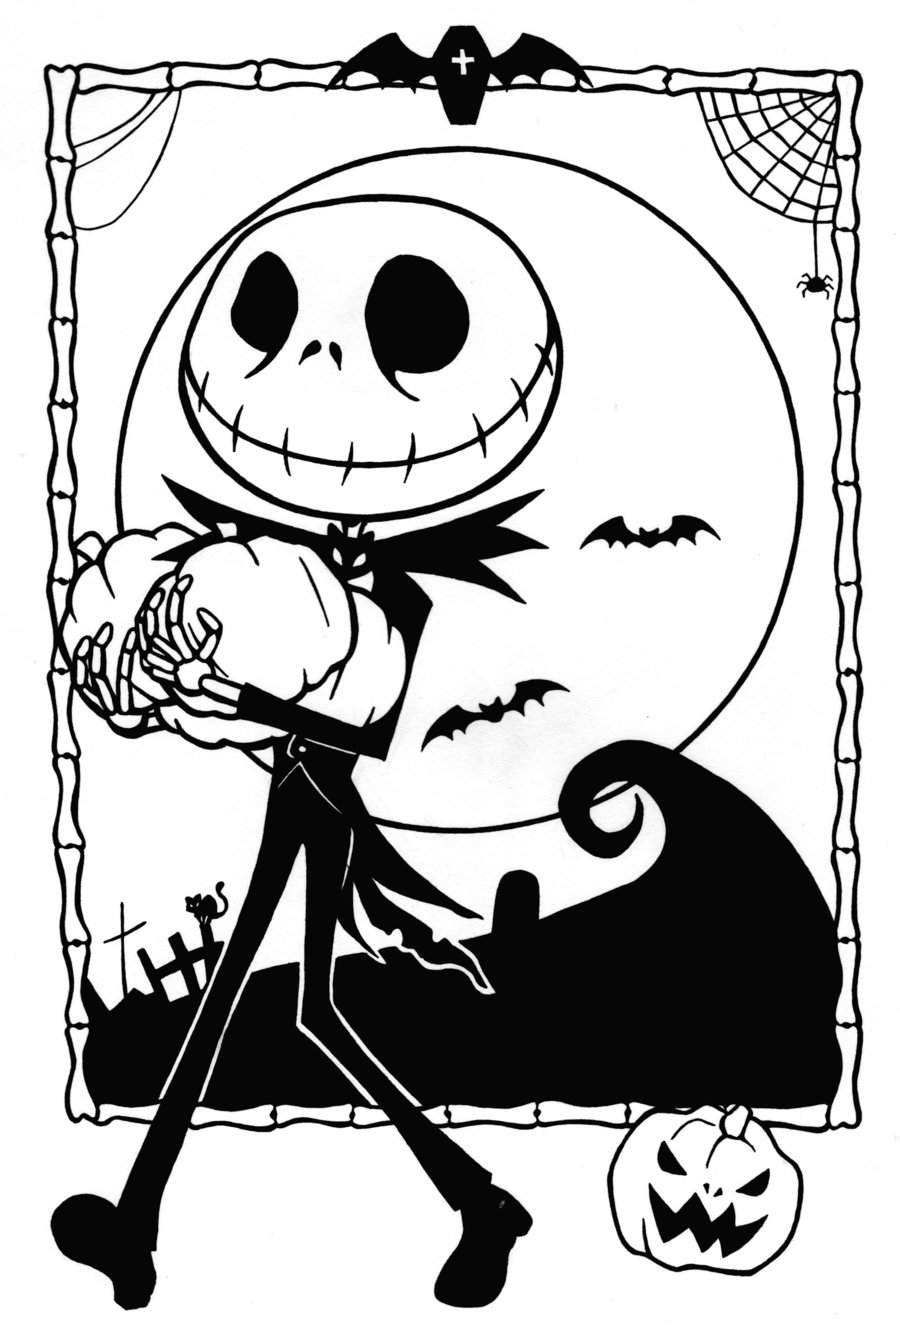 Download Free Printable Nightmare Before Christmas Coloring Pages - Best Coloring Pages For Kids